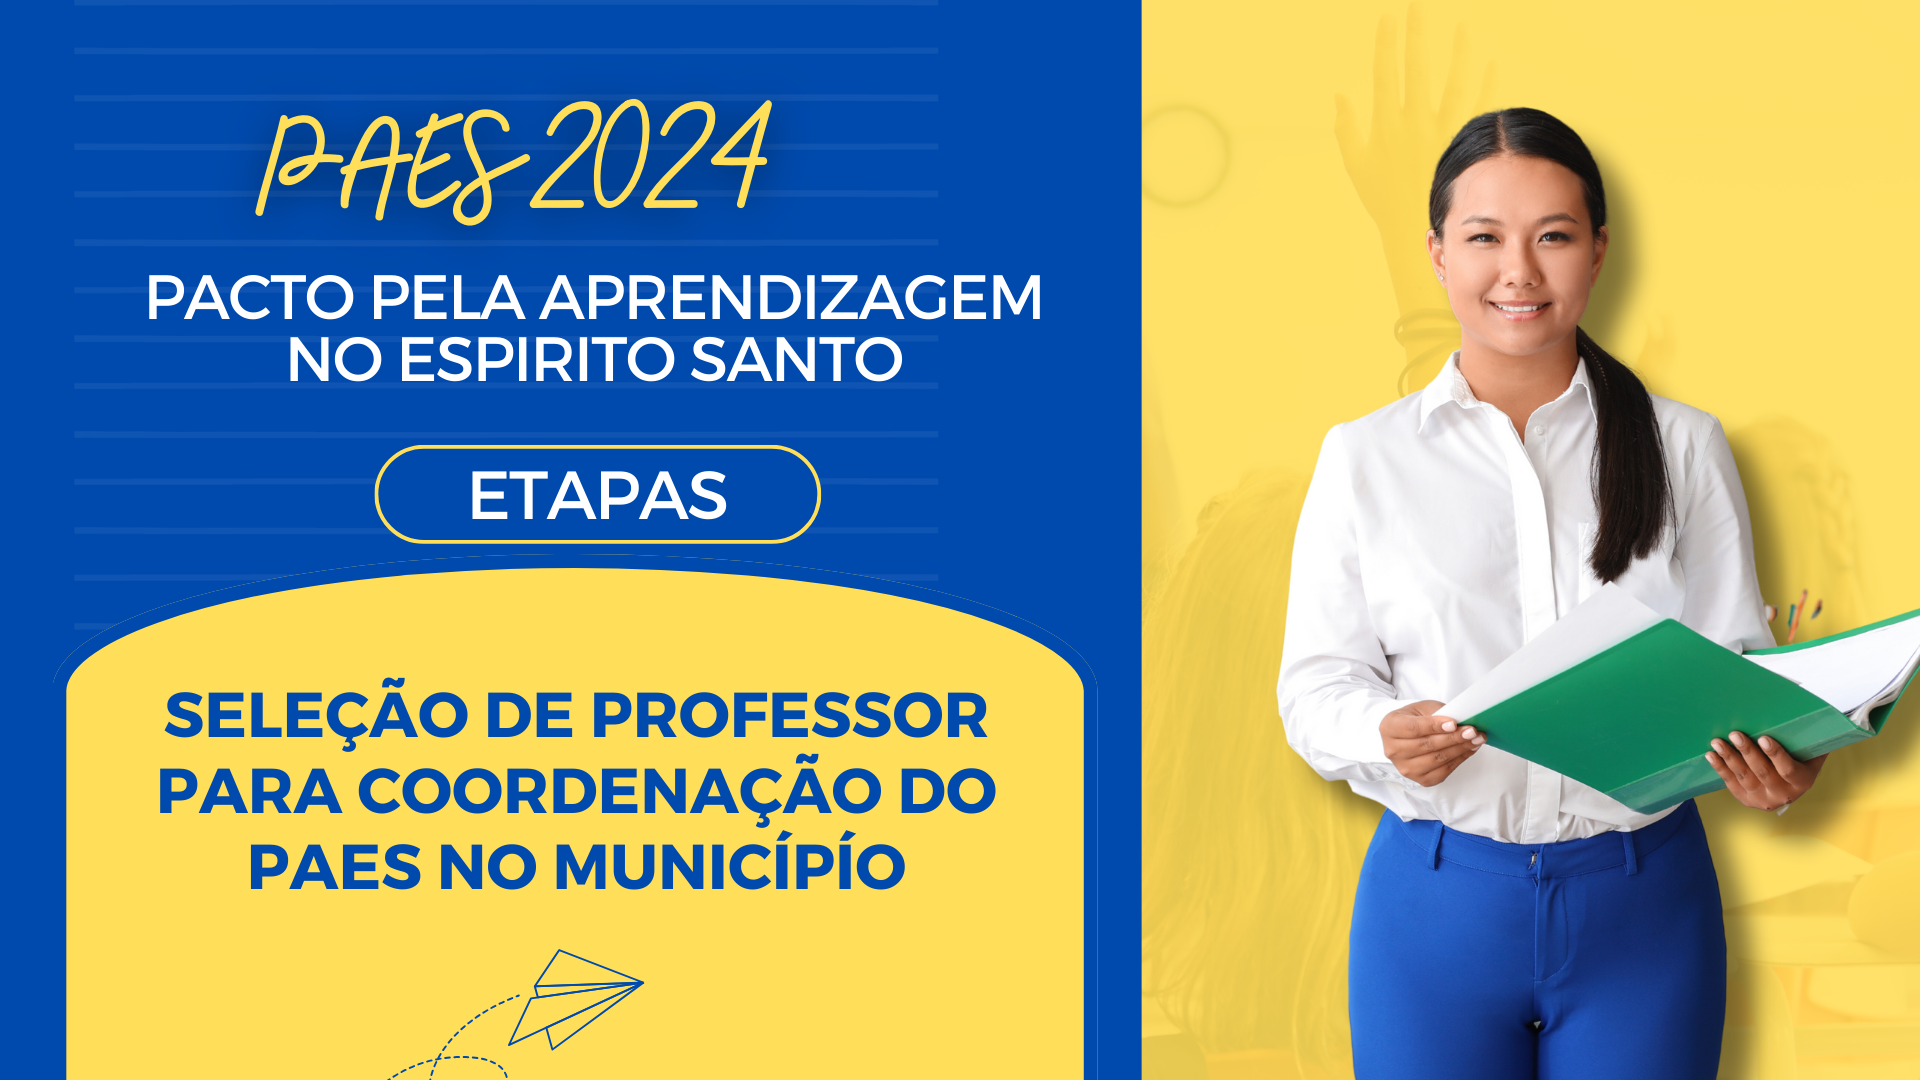 PAES 2024